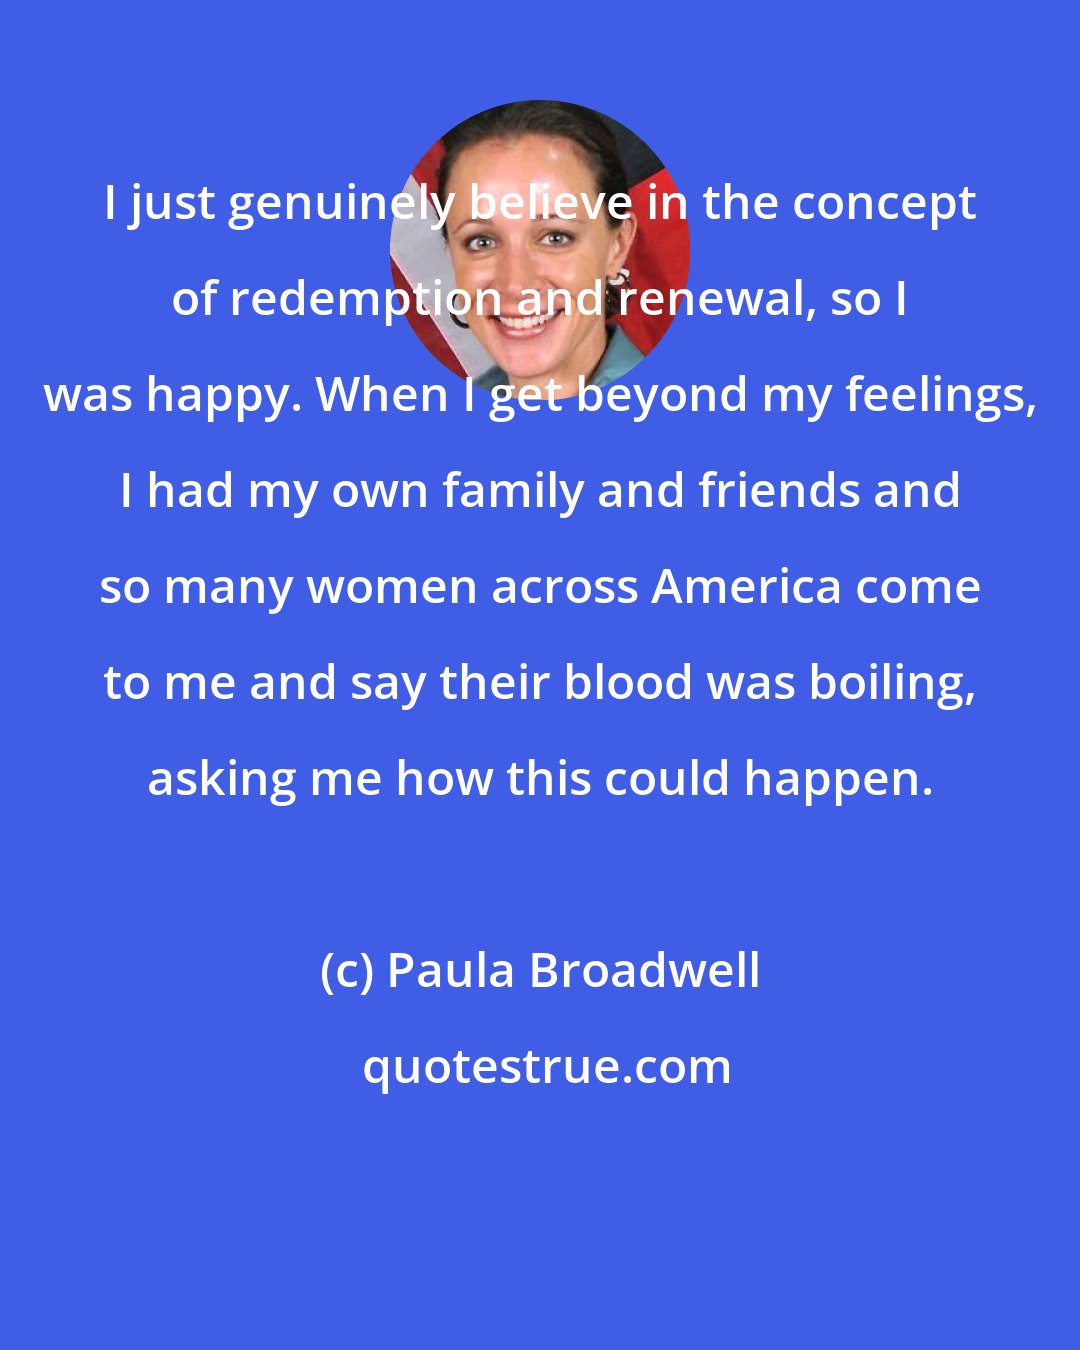 Paula Broadwell: I just genuinely believe in the concept of redemption and renewal, so I was happy. When I get beyond my feelings, I had my own family and friends and so many women across America come to me and say their blood was boiling, asking me how this could happen.